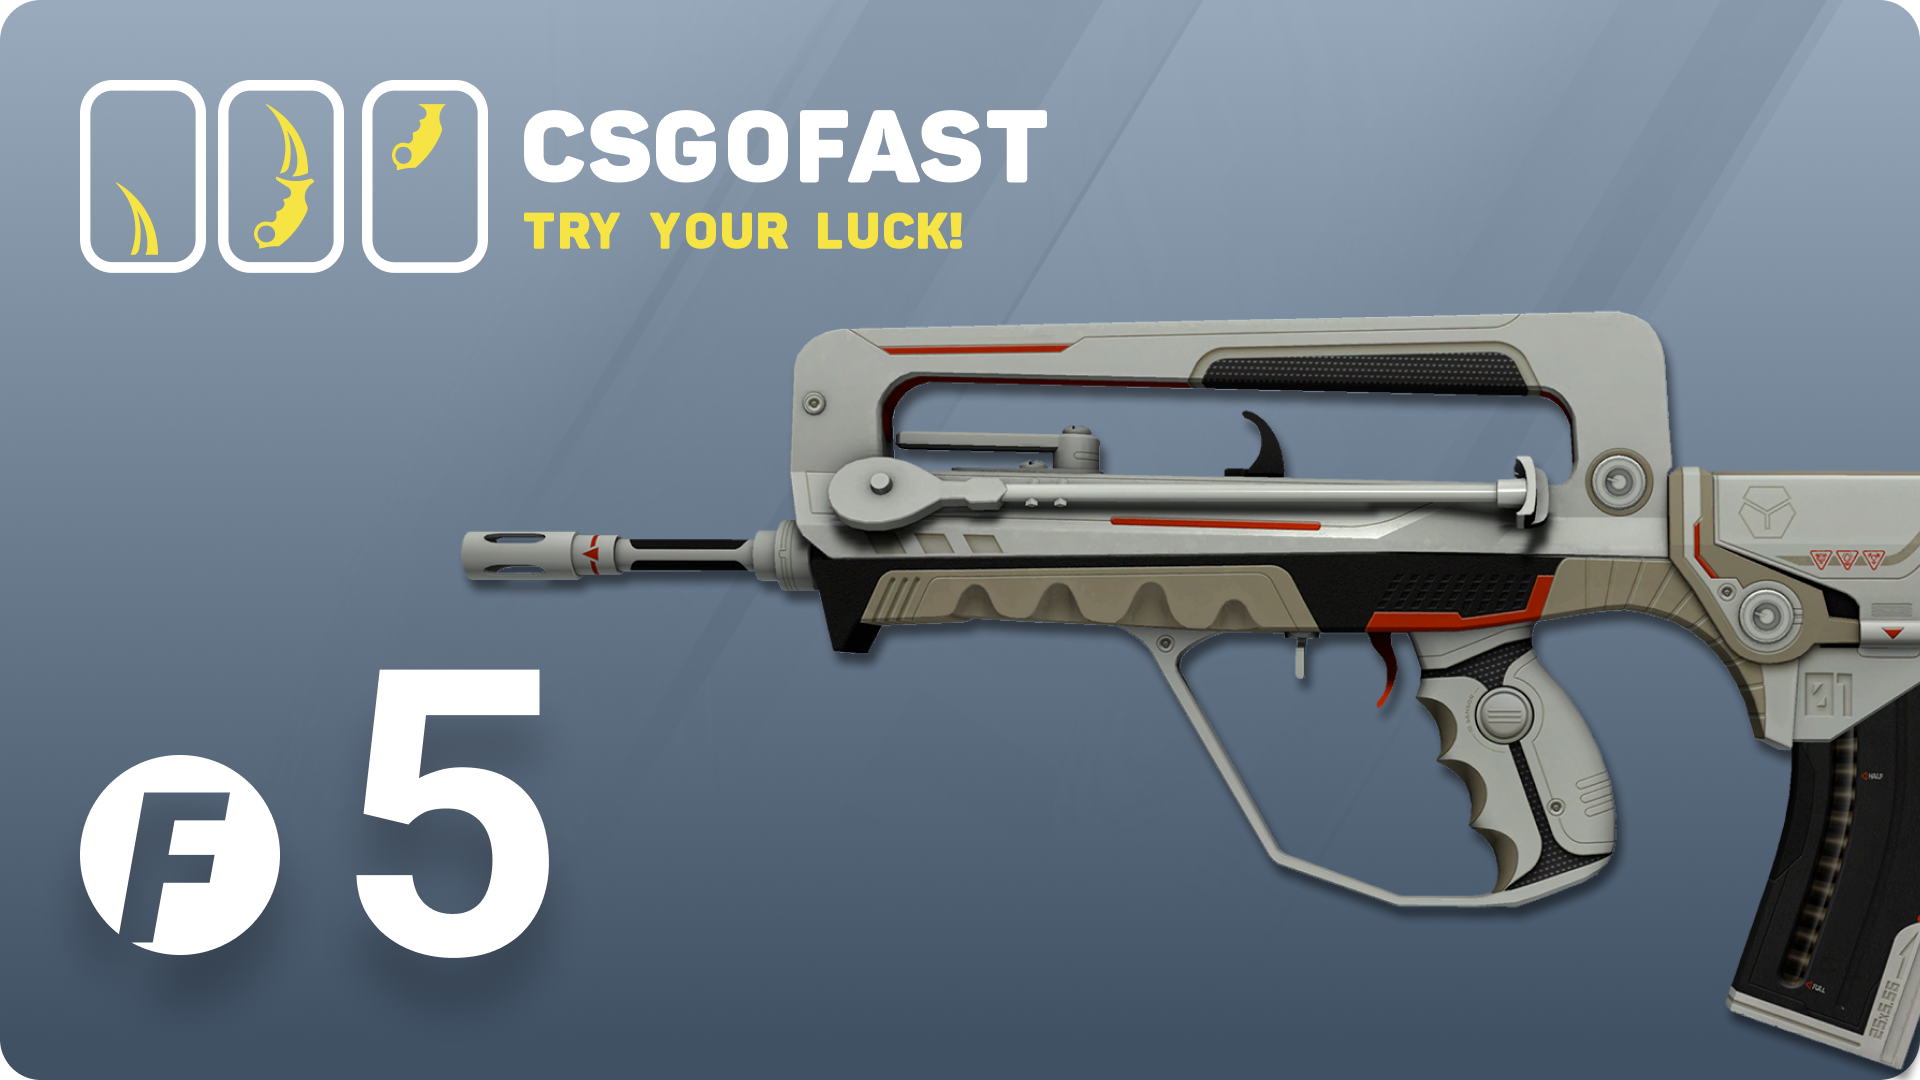 [$ 3.63] CSGOFAST 5 Fast Coins Gift Card